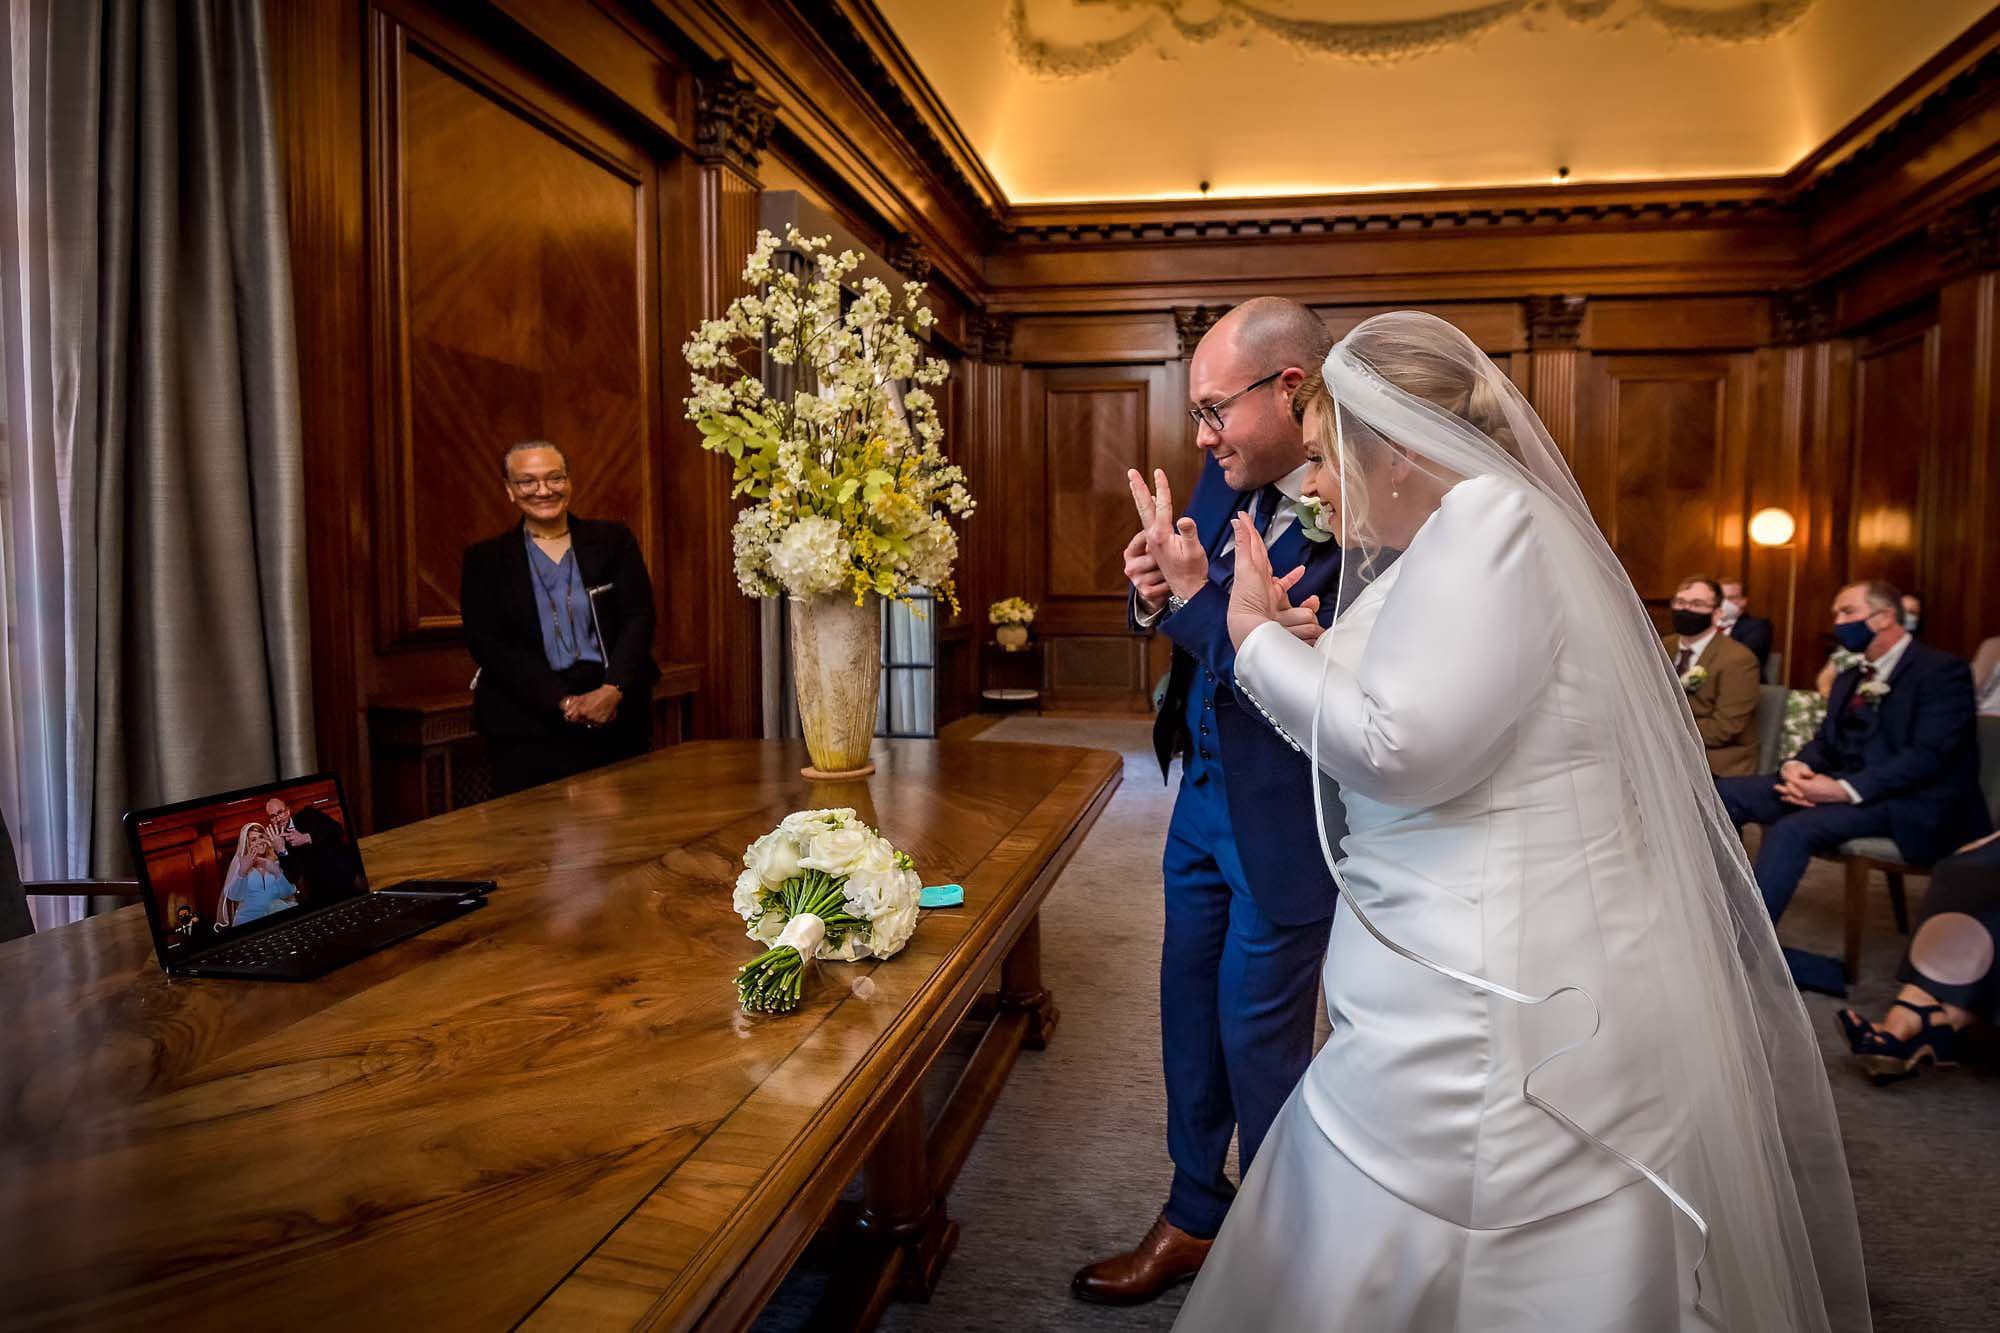 The happy couple show their wedding rings via a Zoom call in the Westminster Room at Old Marylebone Town Hall